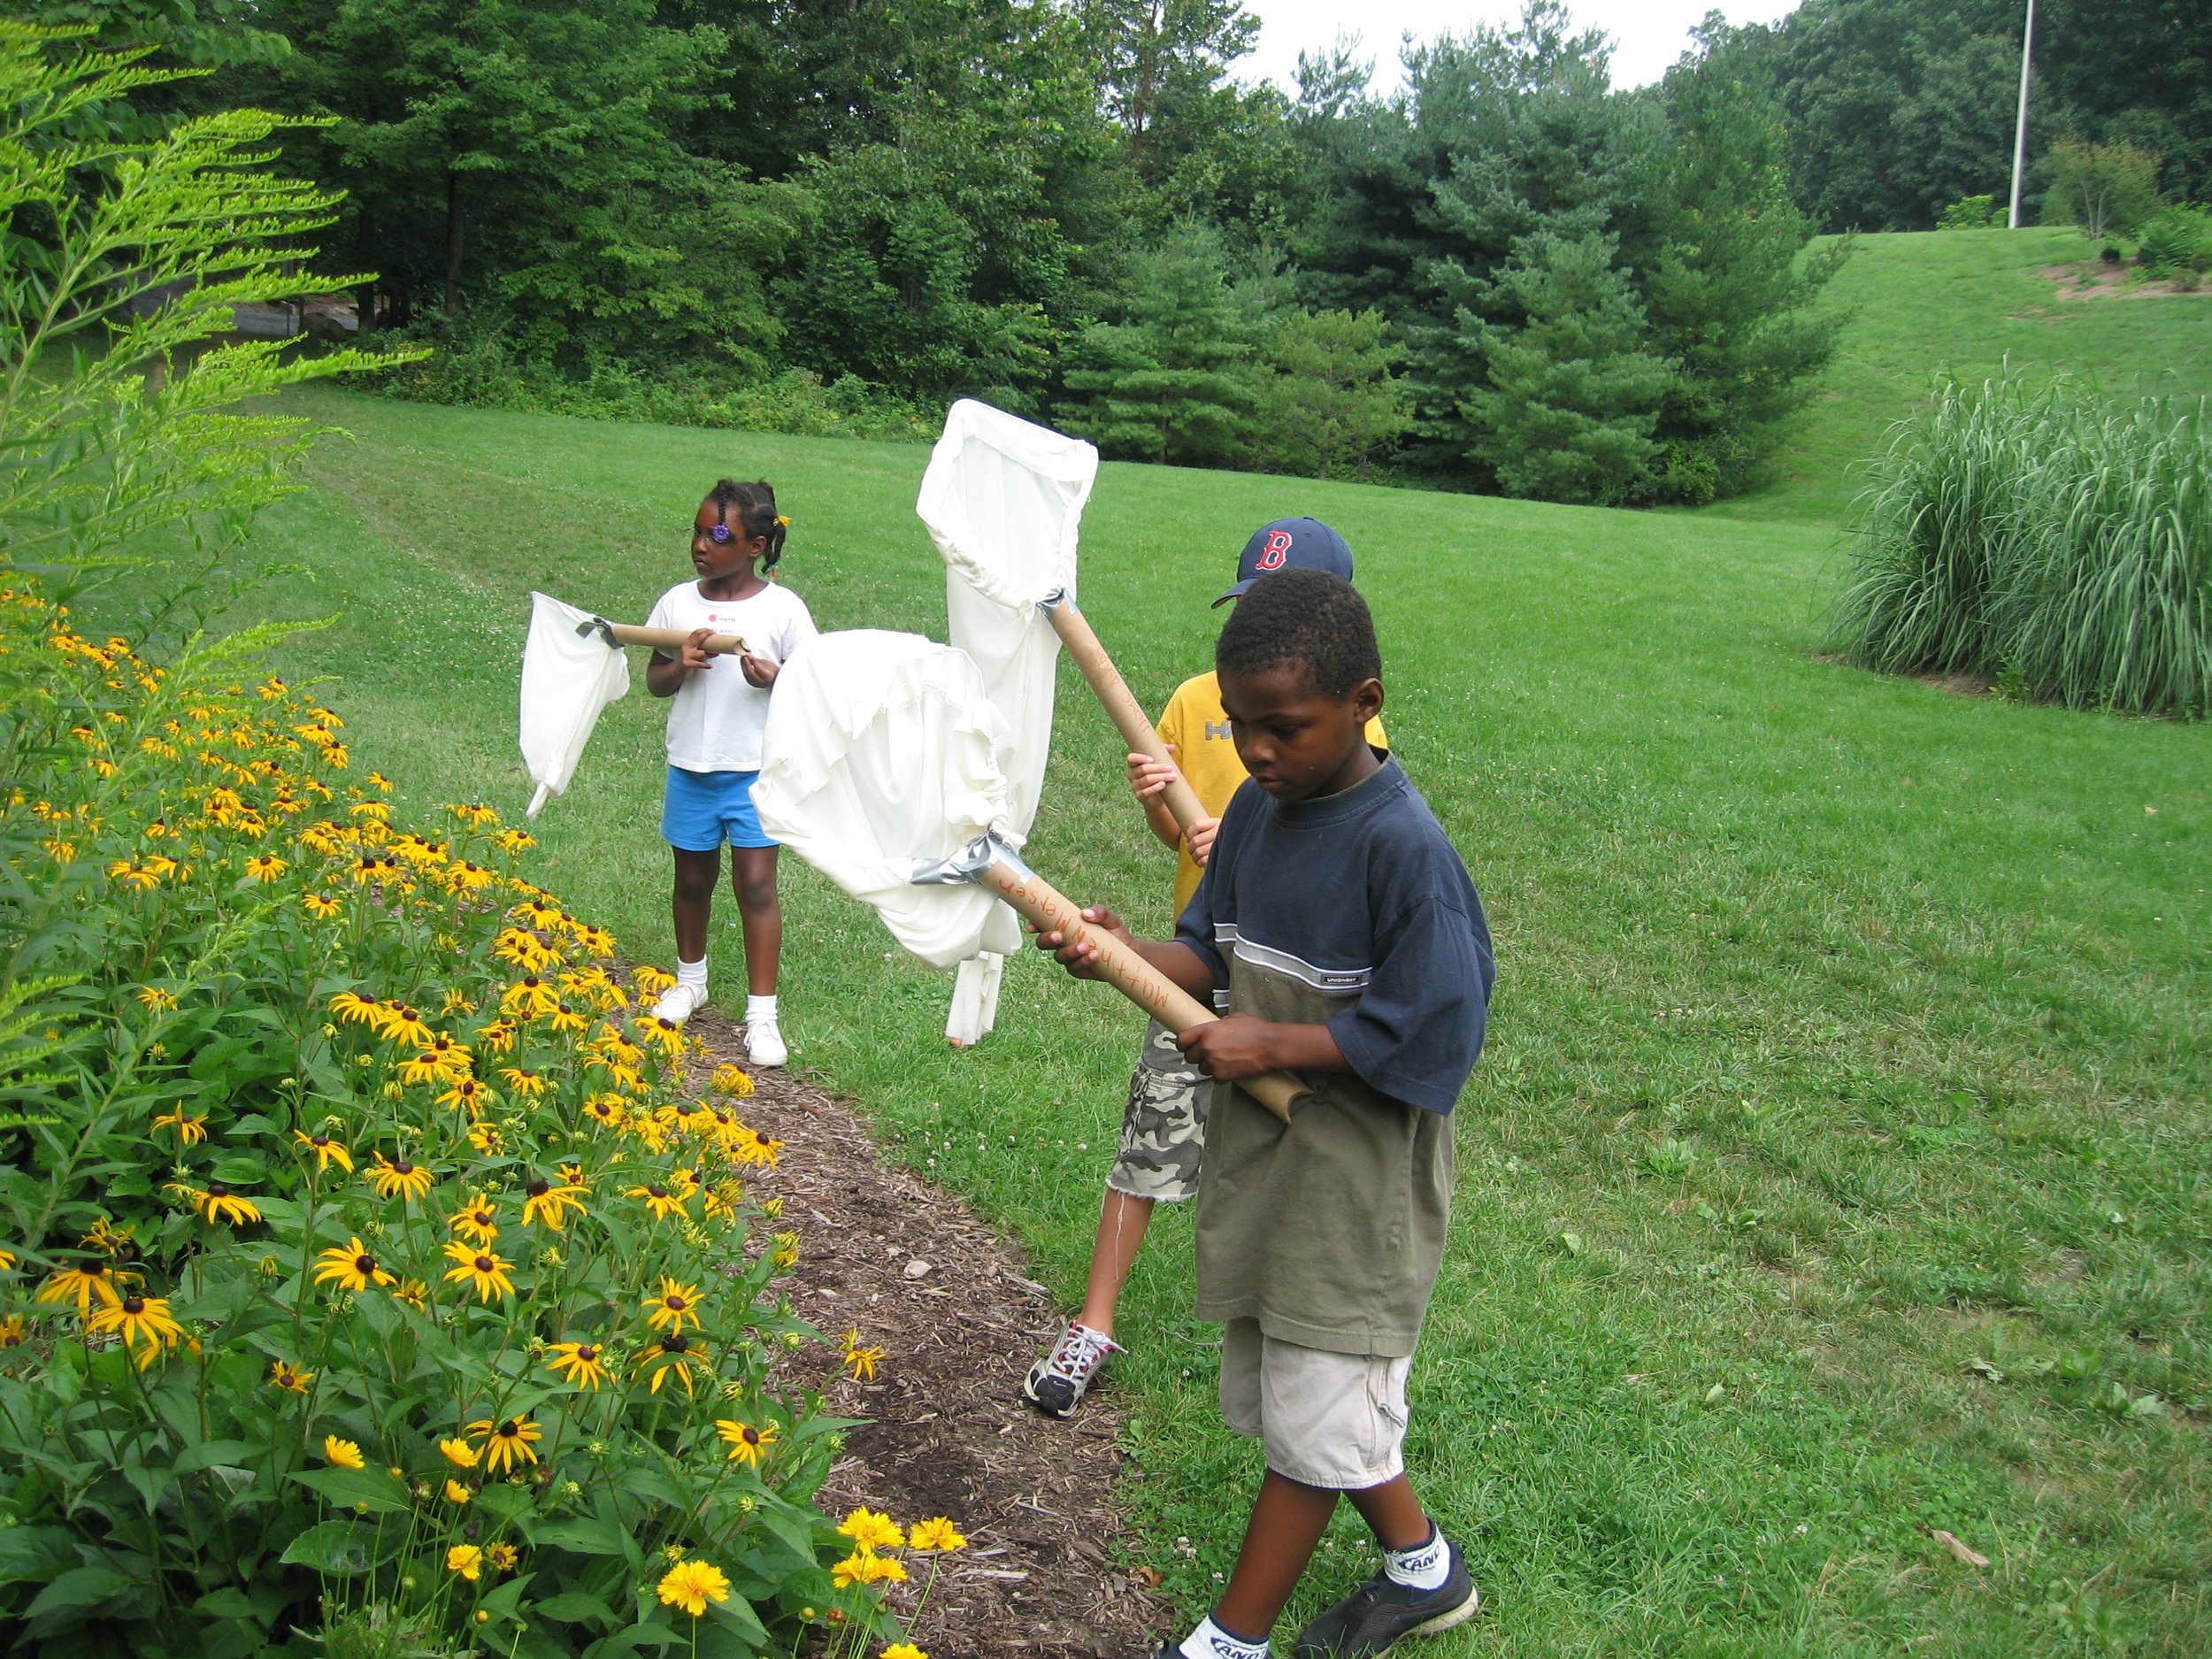  Searching for butterflies at the JMU Arboretum with nets we made in summer camp! 